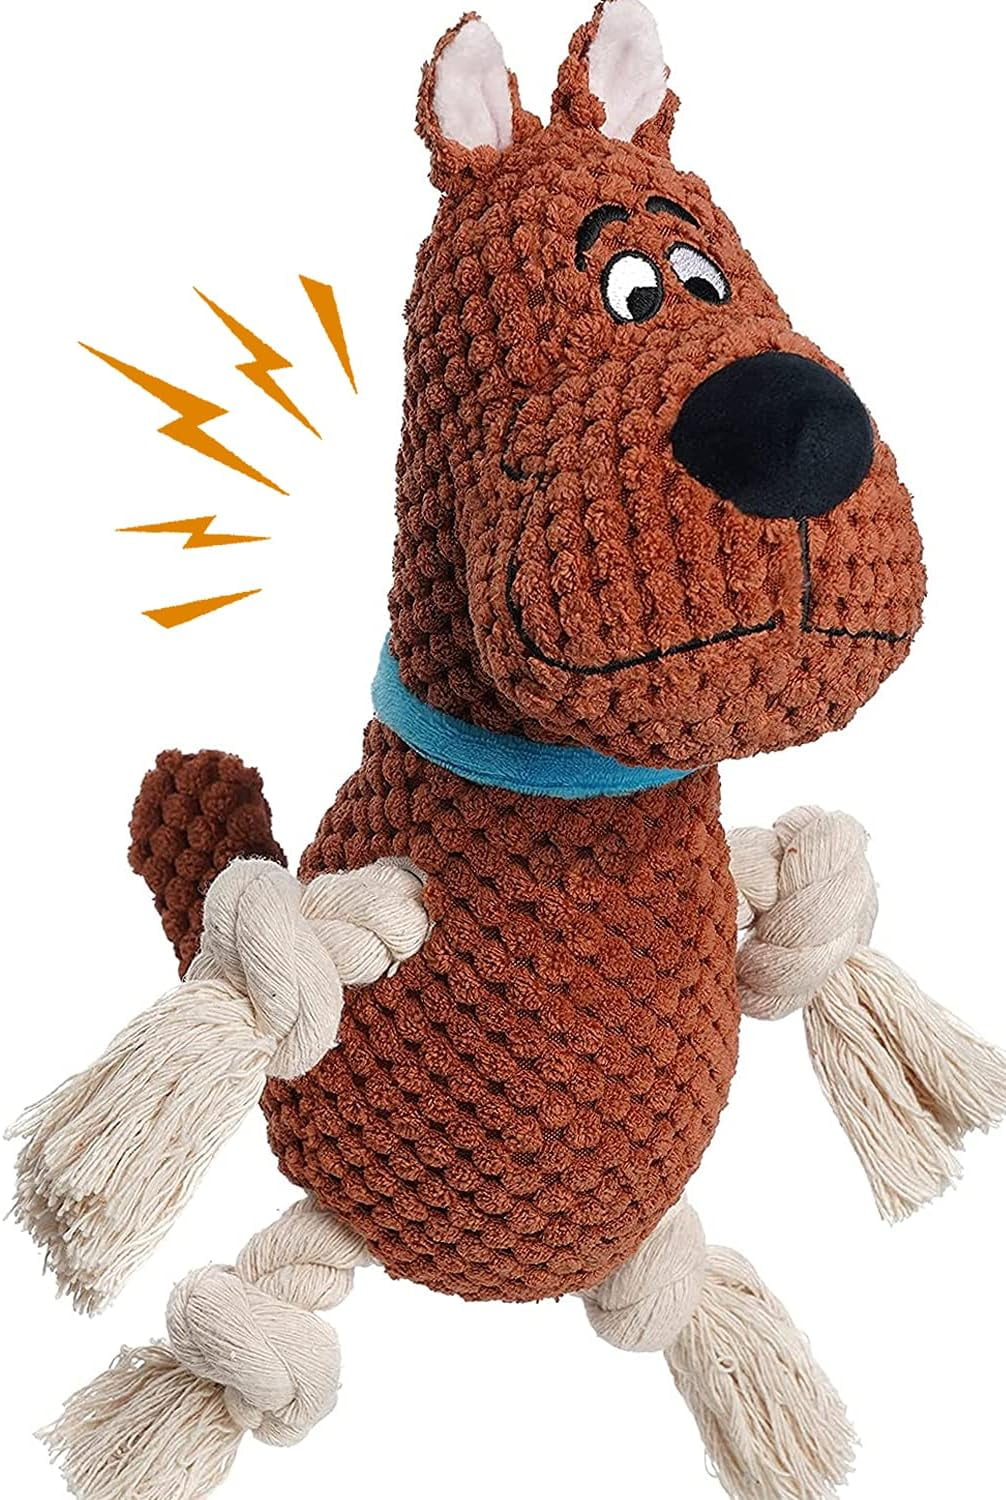 Can Dog Toys Be Controversial? - Grouchy Puppy® Blog